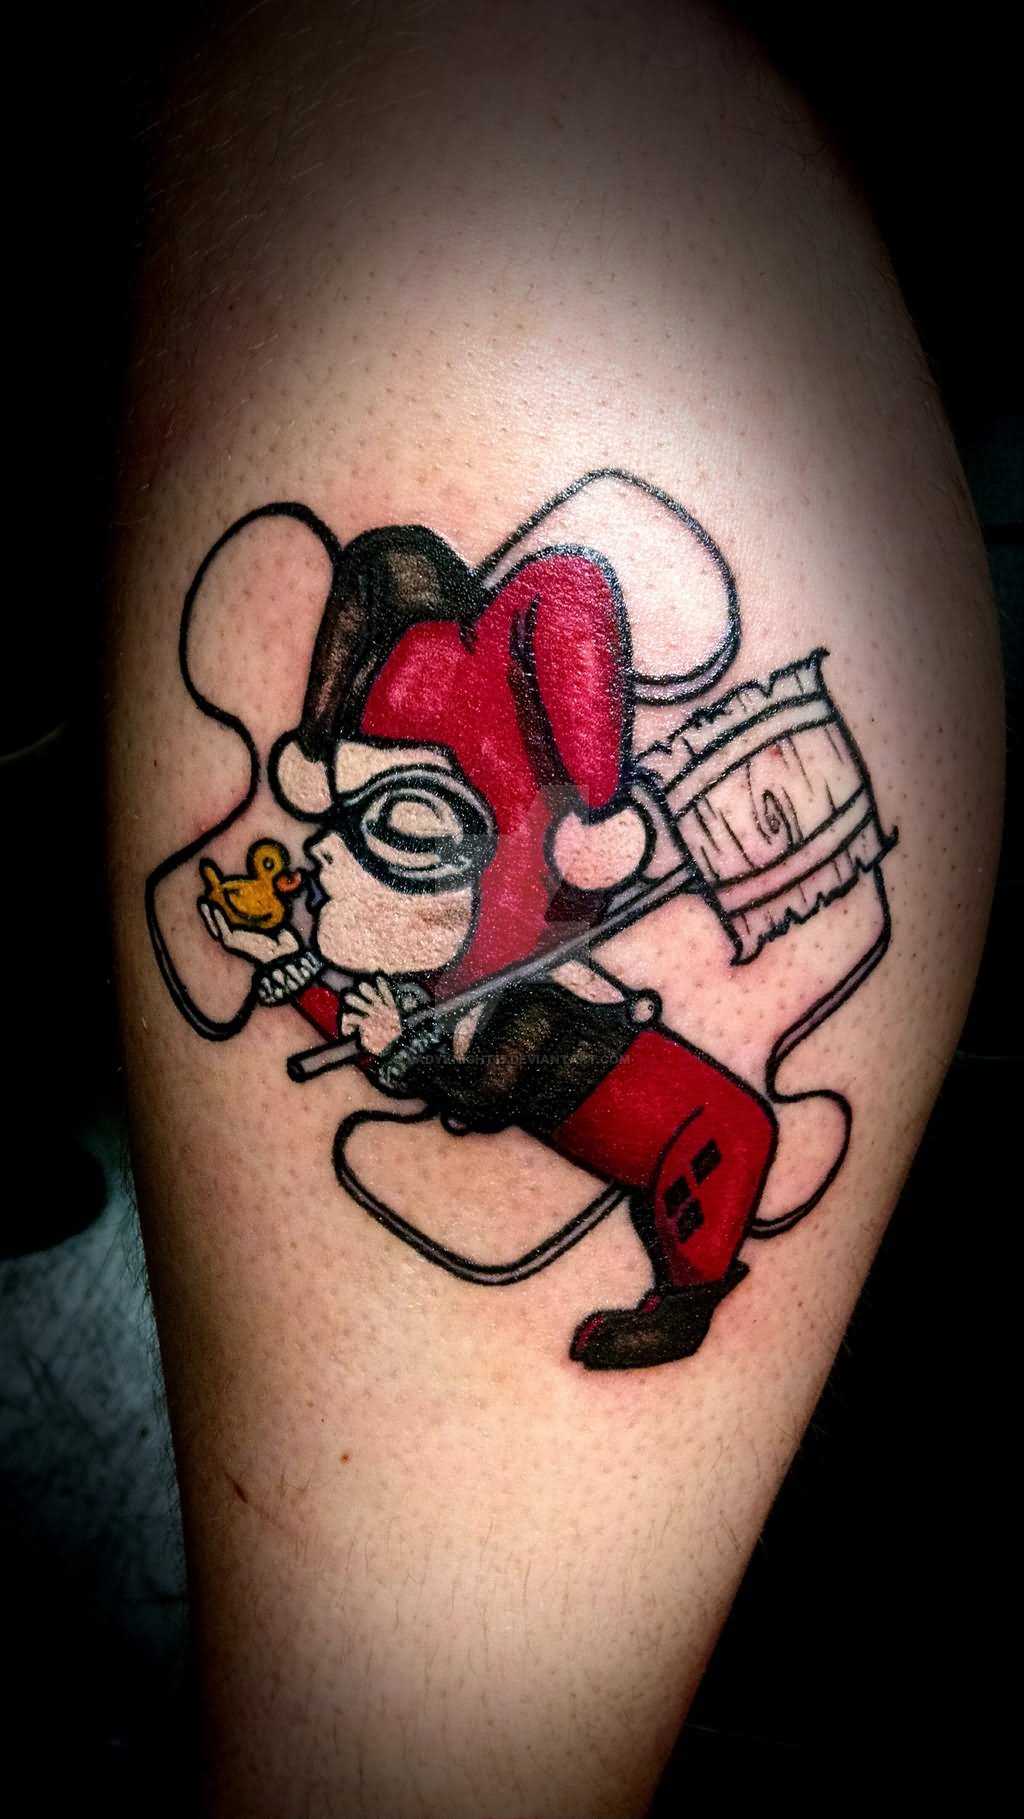 Harley Quinn With Tiny Duck In Hand Tattoo by Ladyknight17